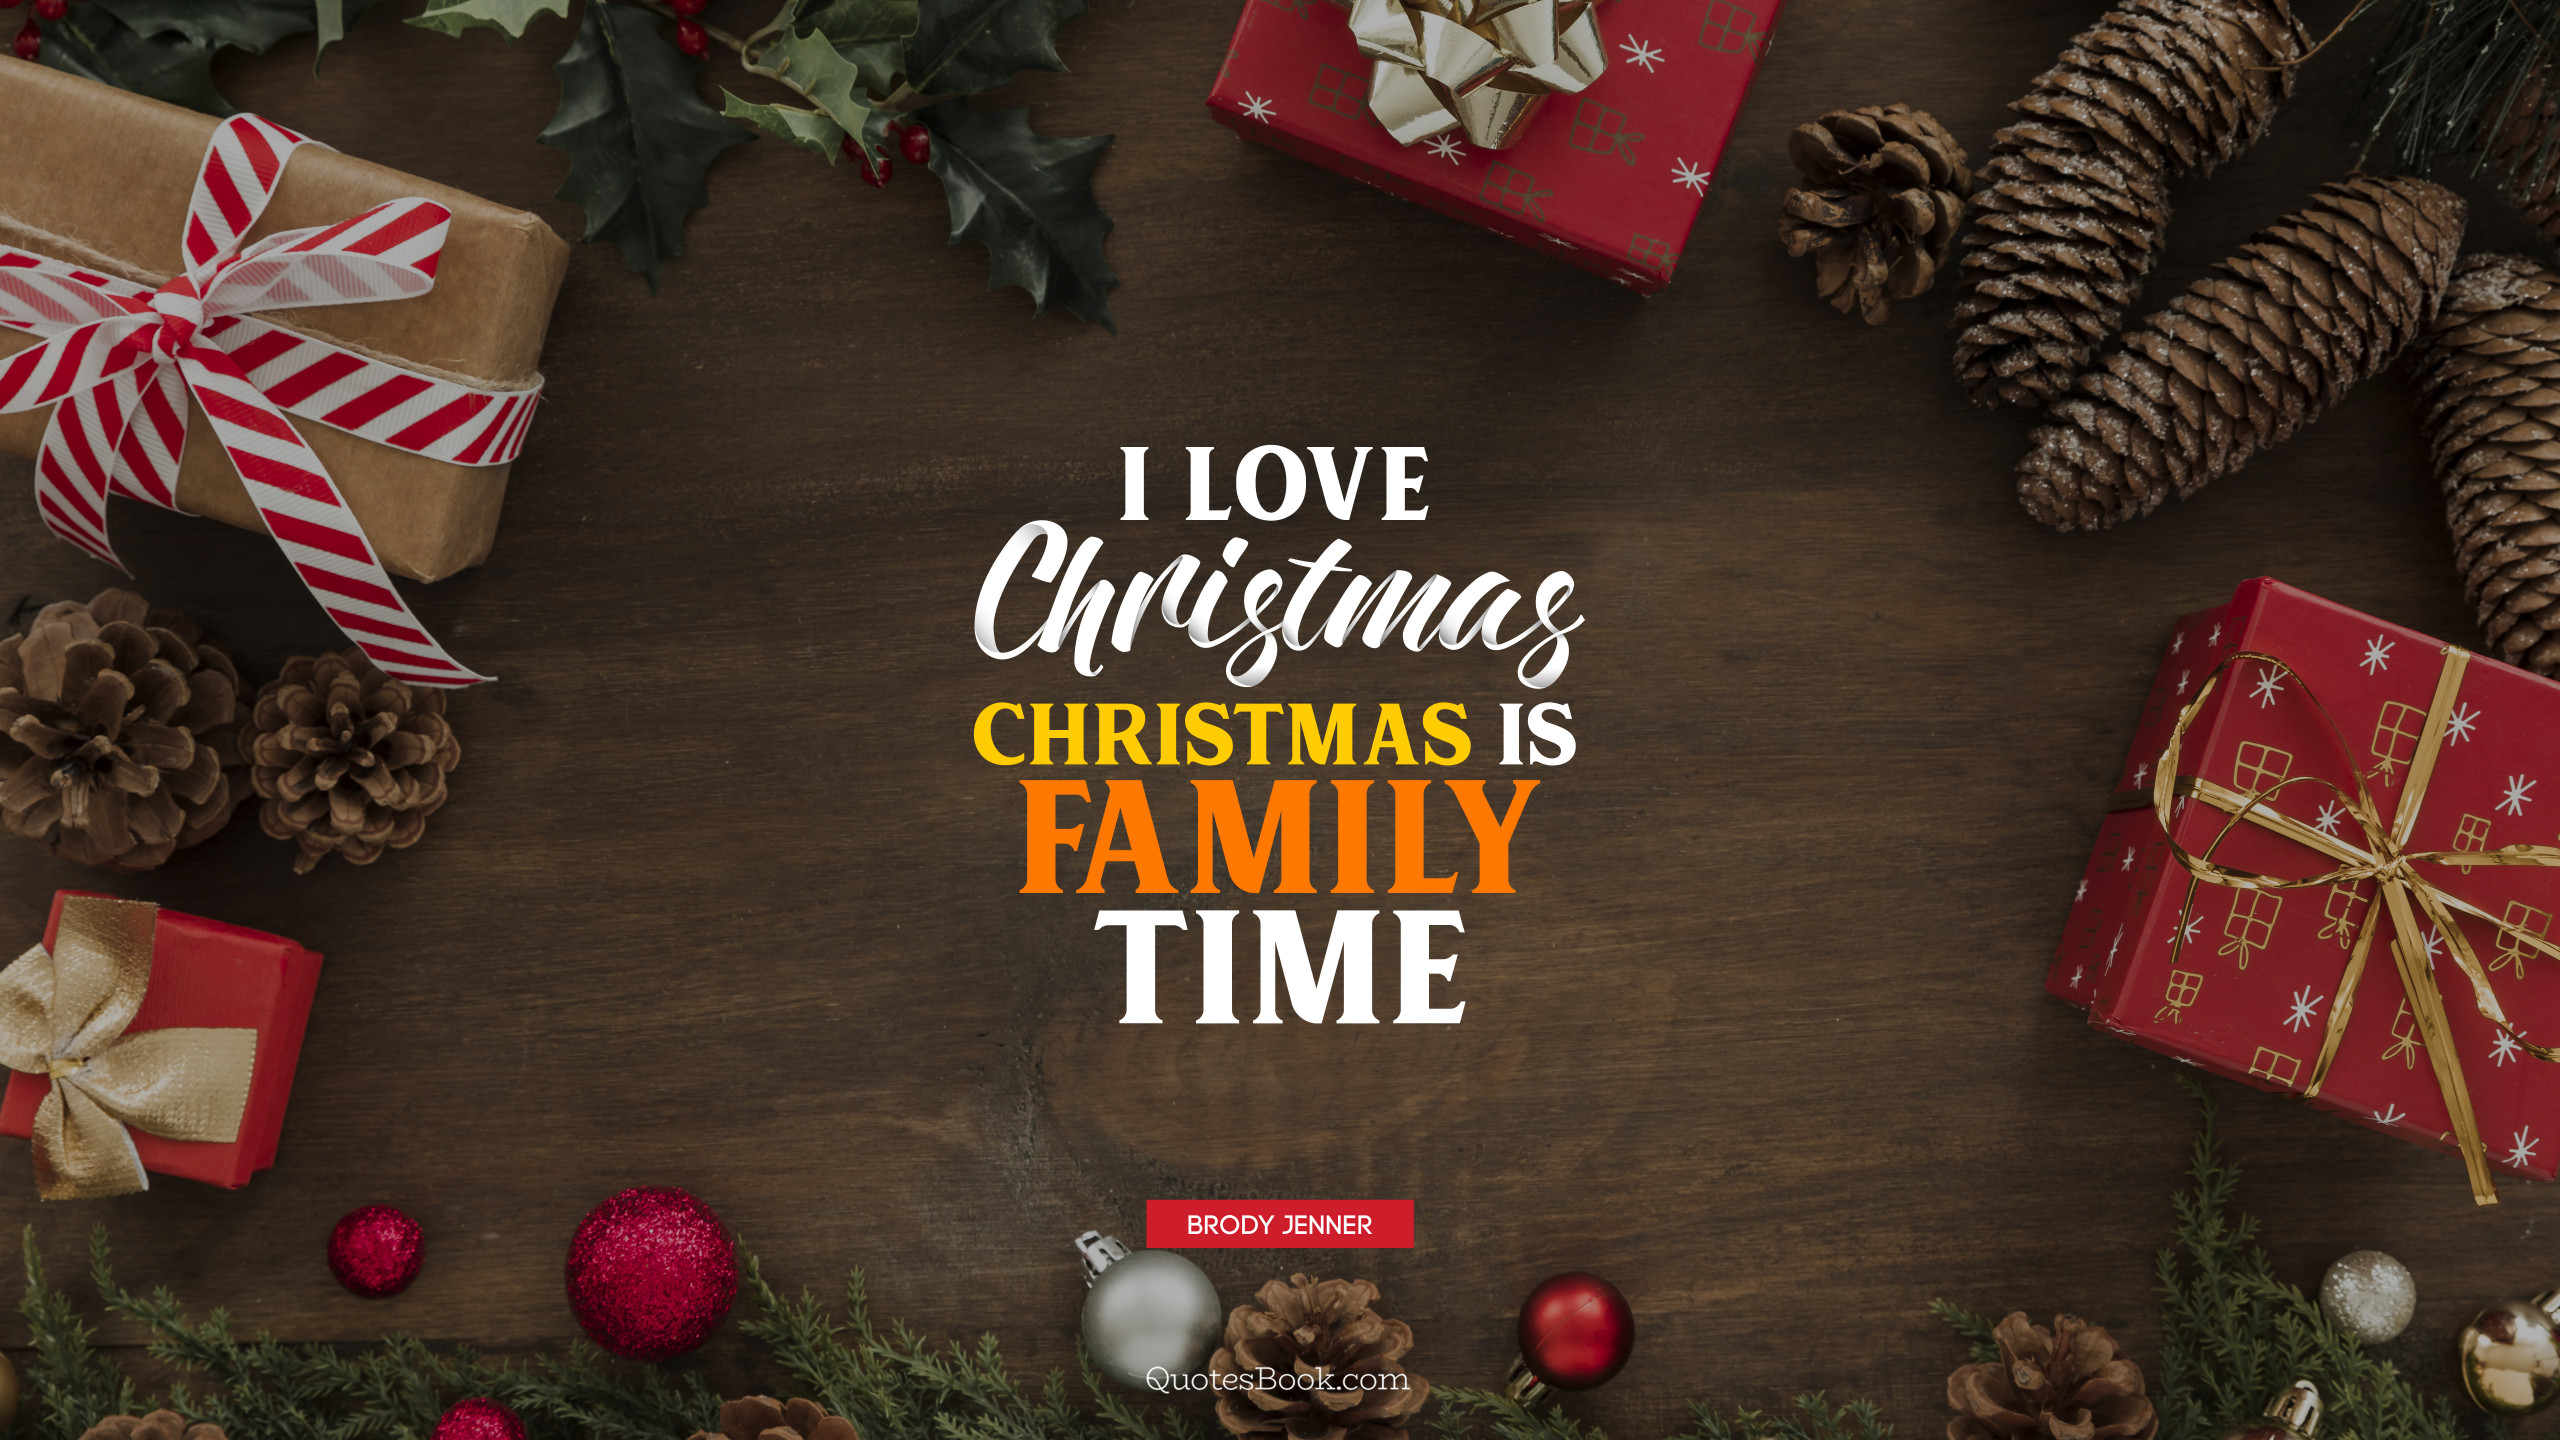 I love Christmas. Christmas is family time. - Quote by Brody Jenner - QuotesBook